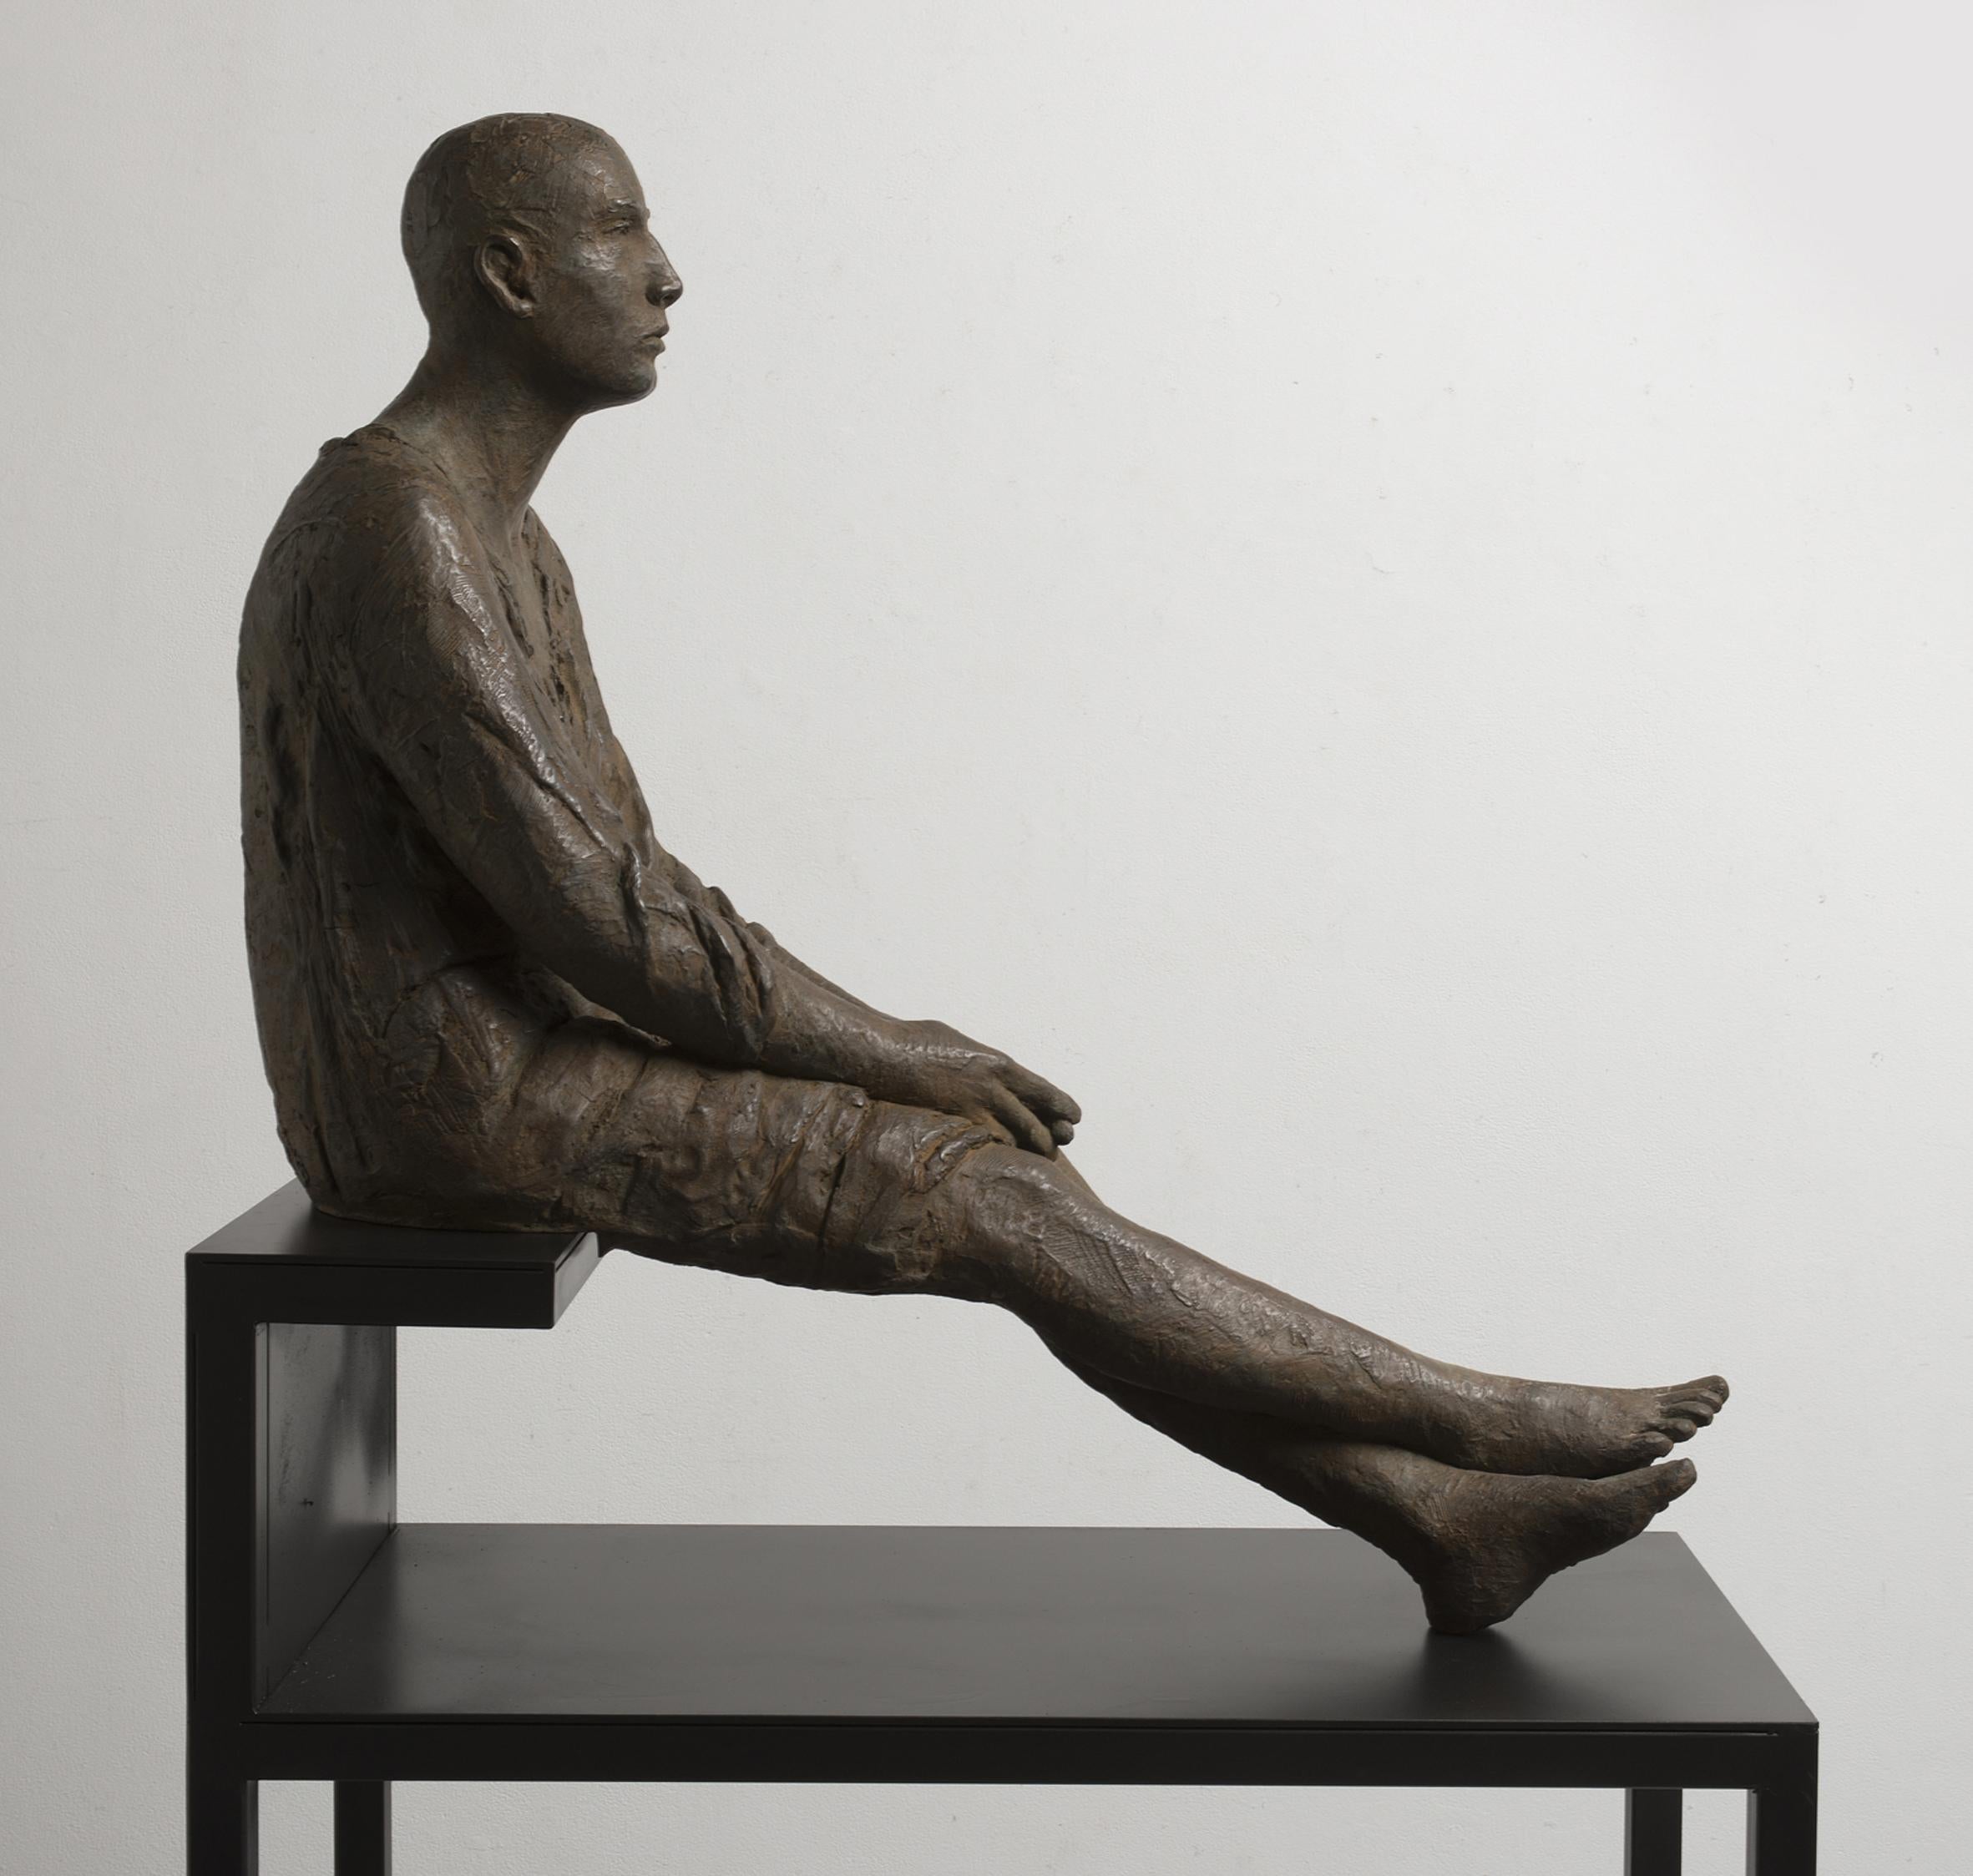 Bronze #116 by Hanneke Beaumont

Beaumont's sculptures are realized in terracotta, bronze and cast iron, and she is known for sculpting figural life-sized human forms. Her gender neutral subjects are impressively passé in posture, and are meant to